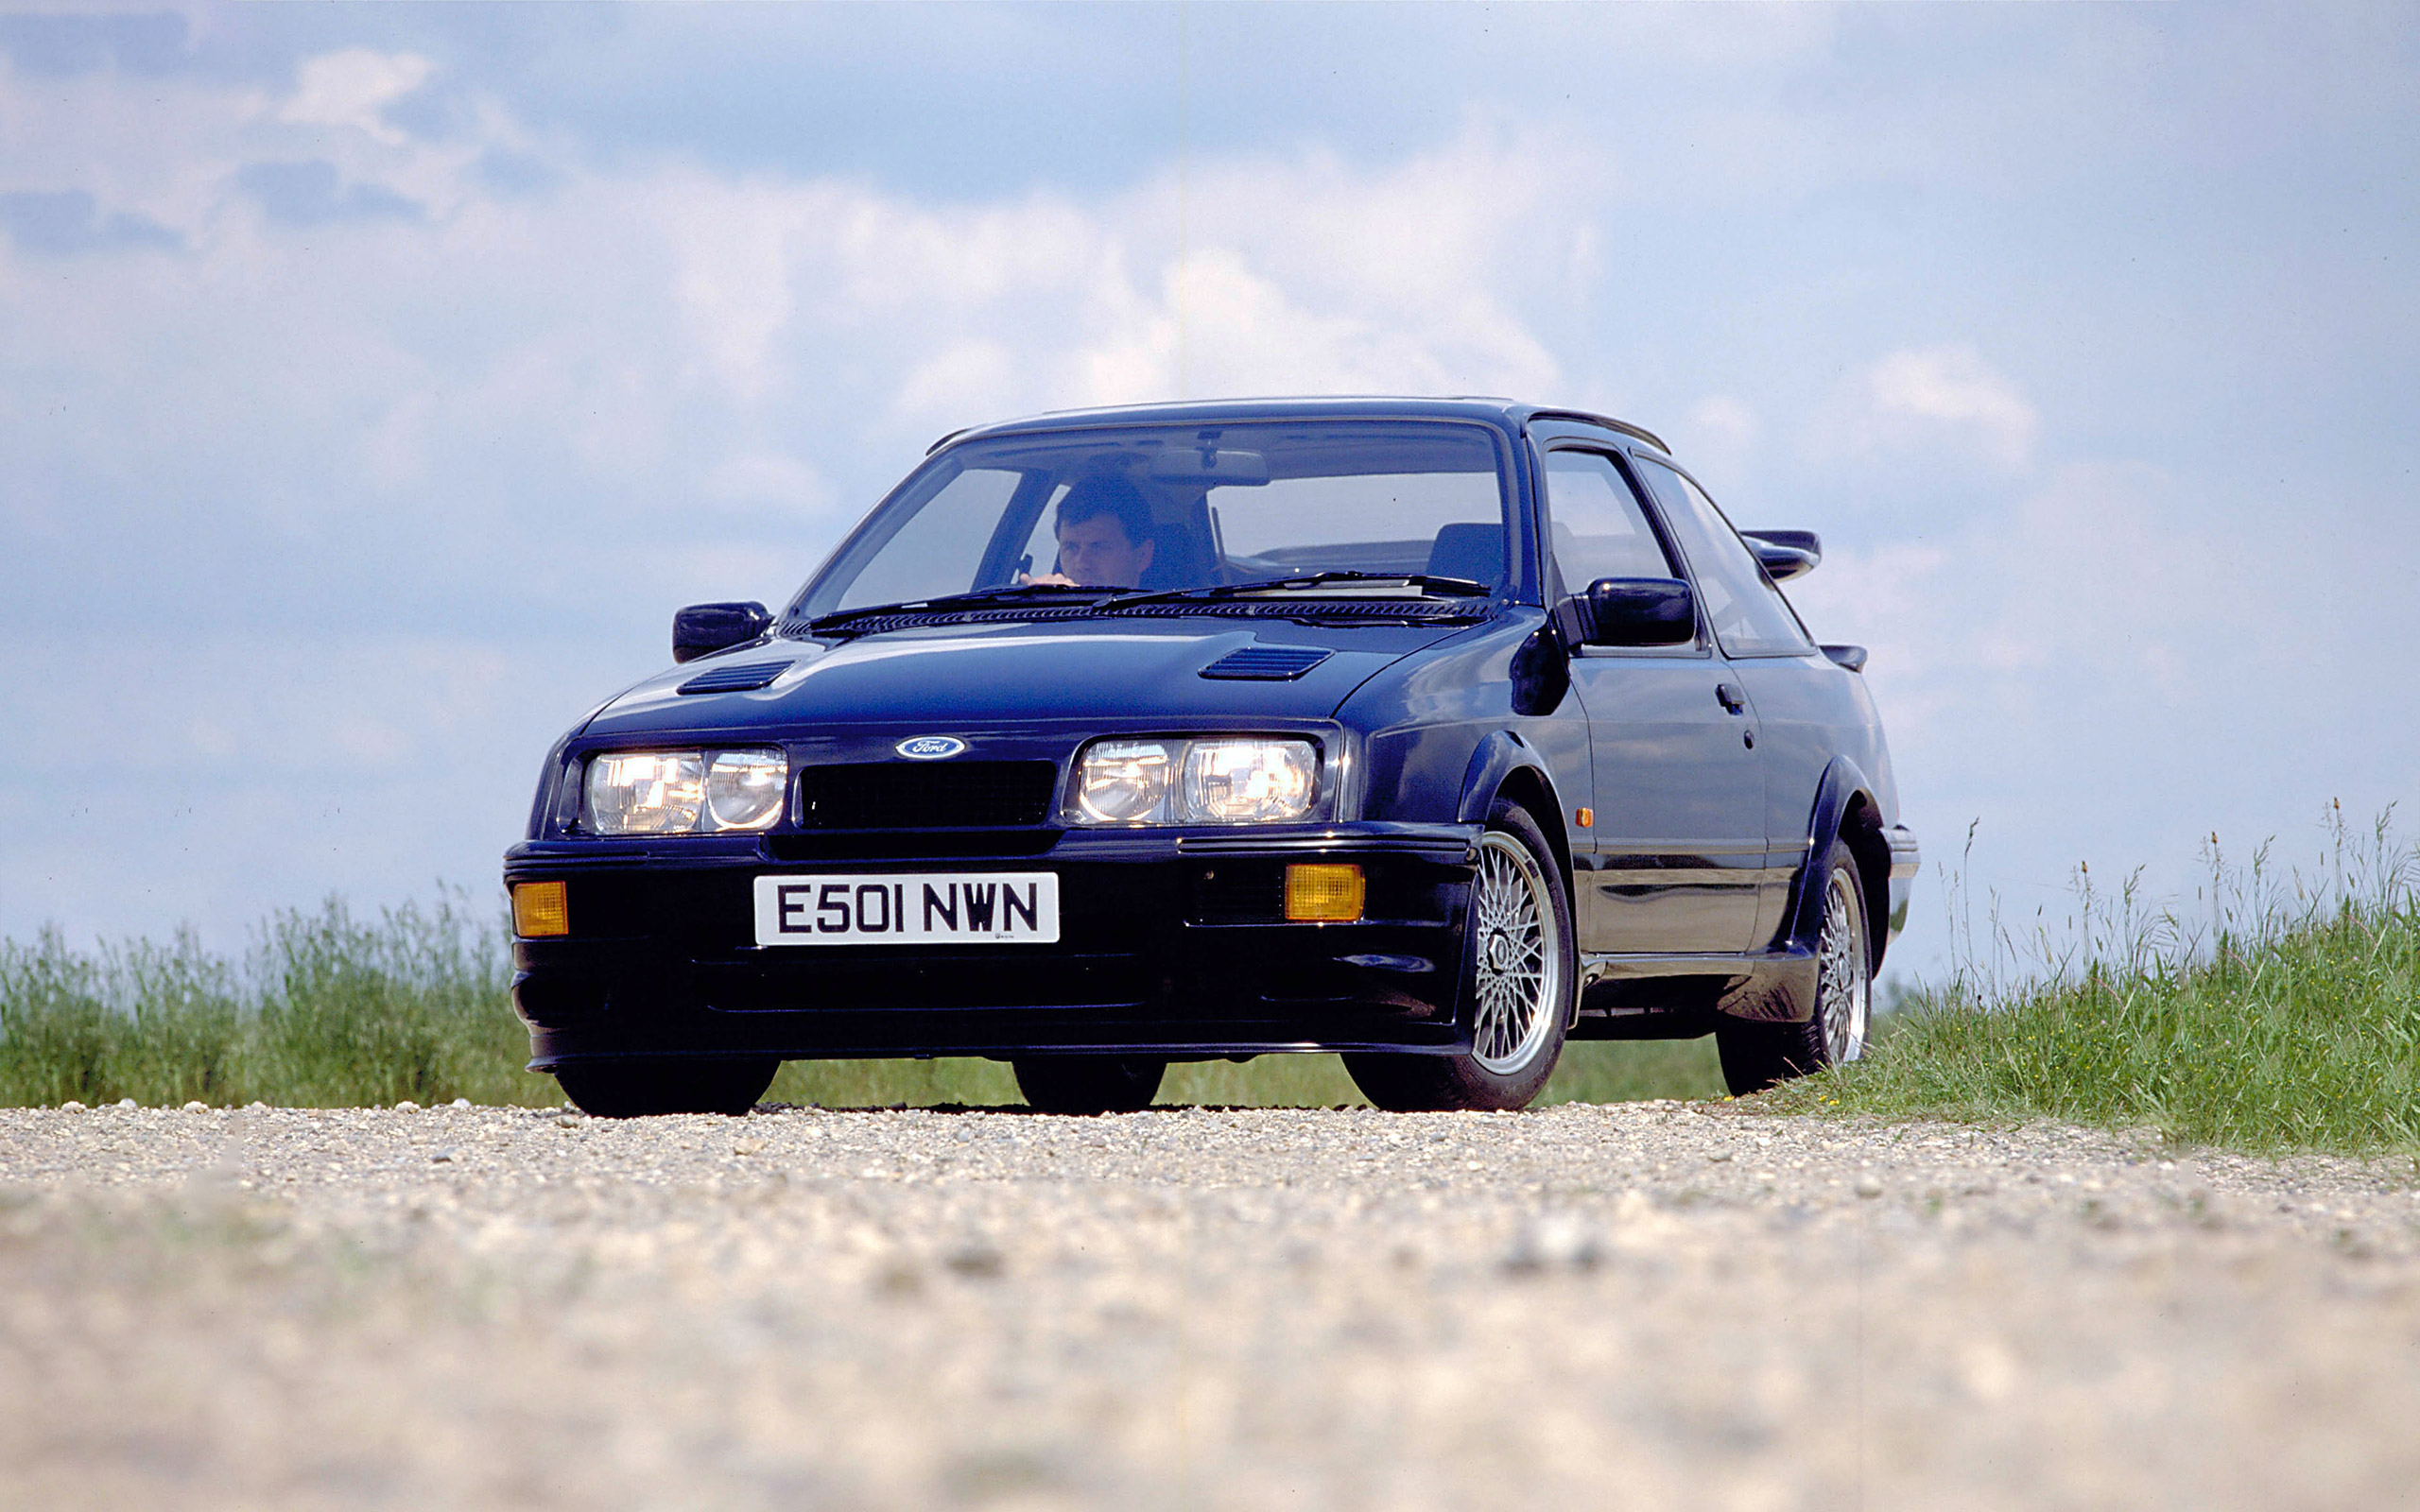  1987 Ford Sierra RS500 Cosworth Wallpaper.